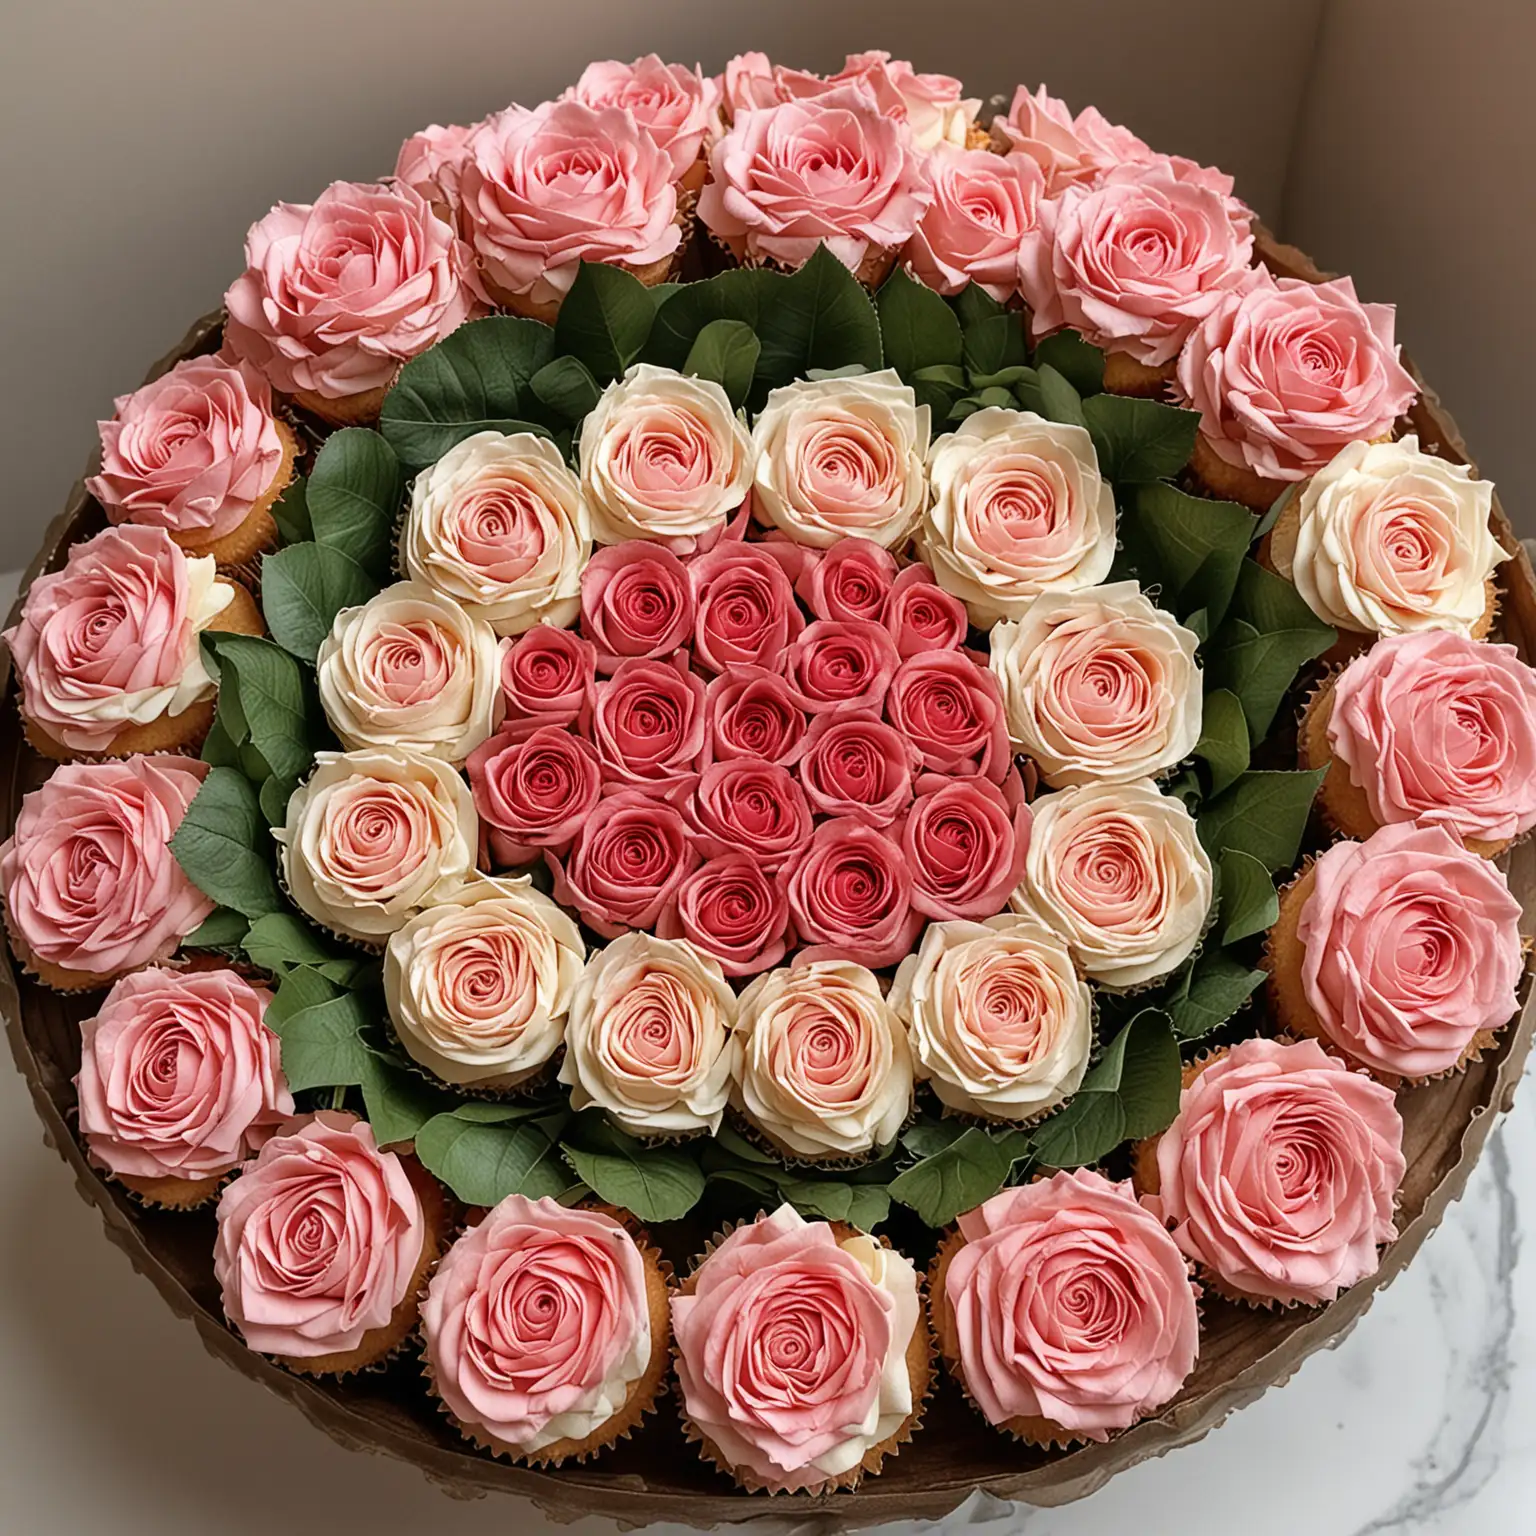 a round tray holding a bouquet of fresh roses in the center of the tray with a ring of cupcakes on the tray that surround the rose bouquet